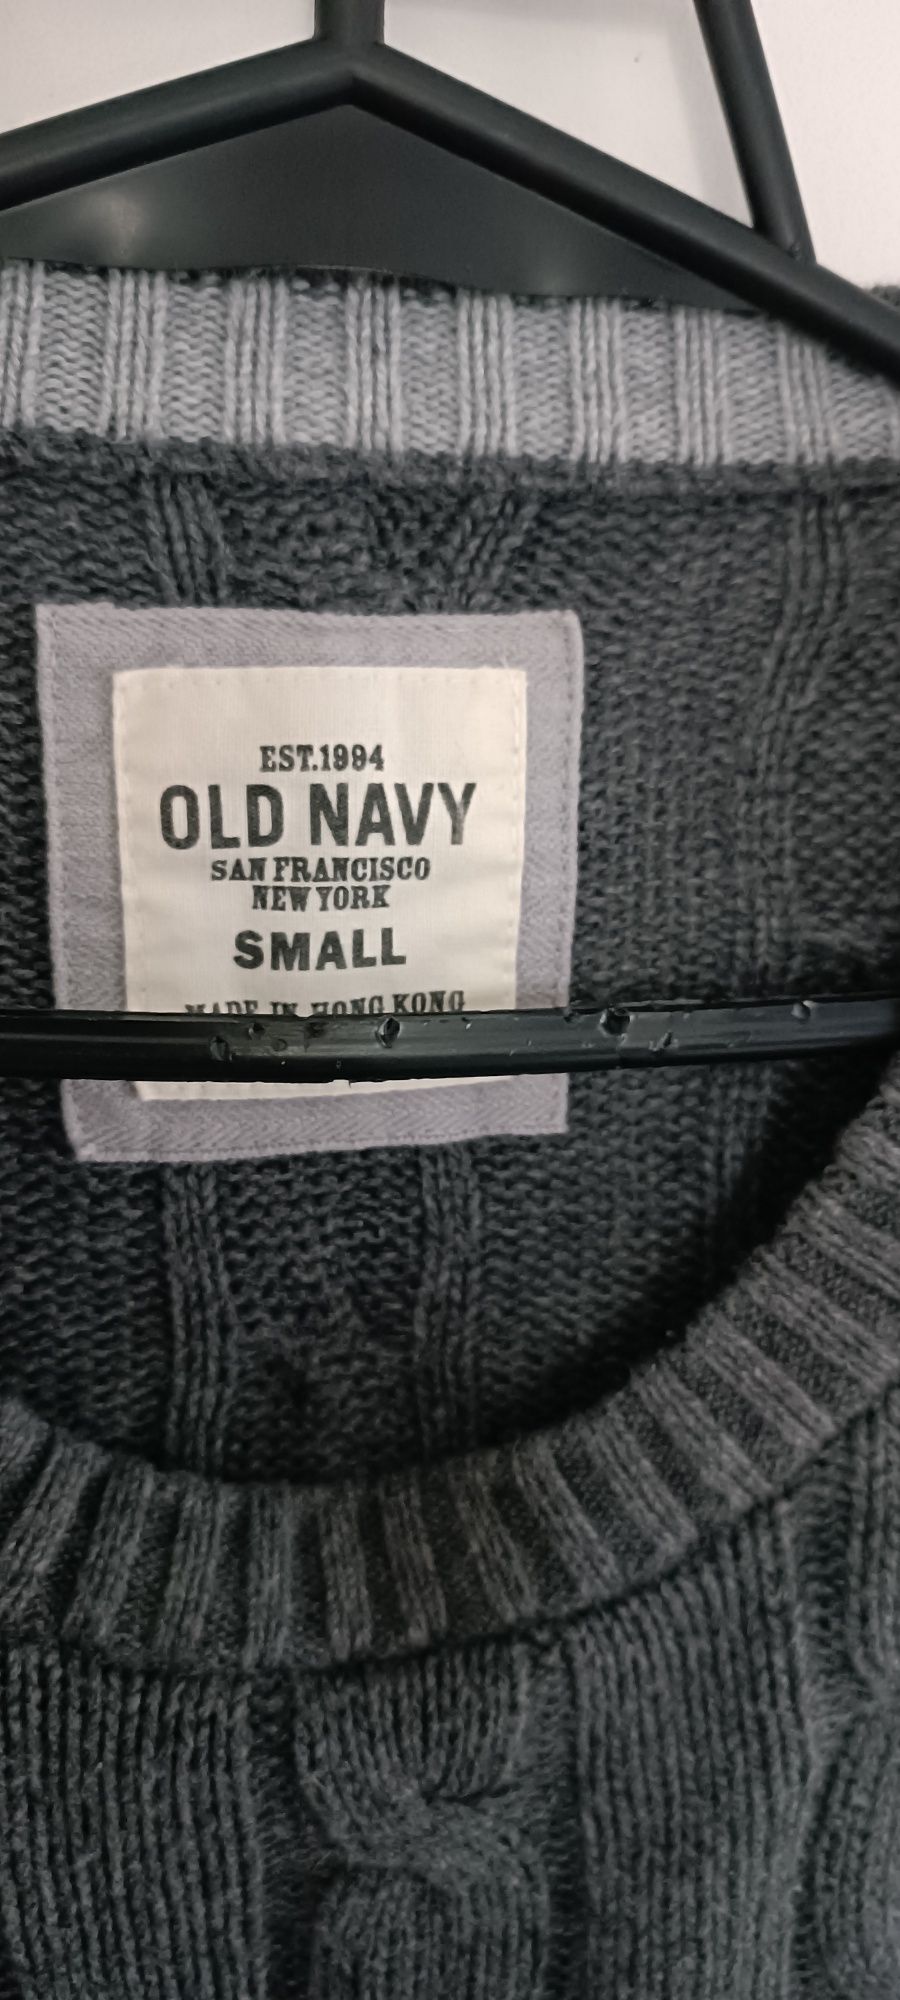 Sweter Old Navy roz.S/M